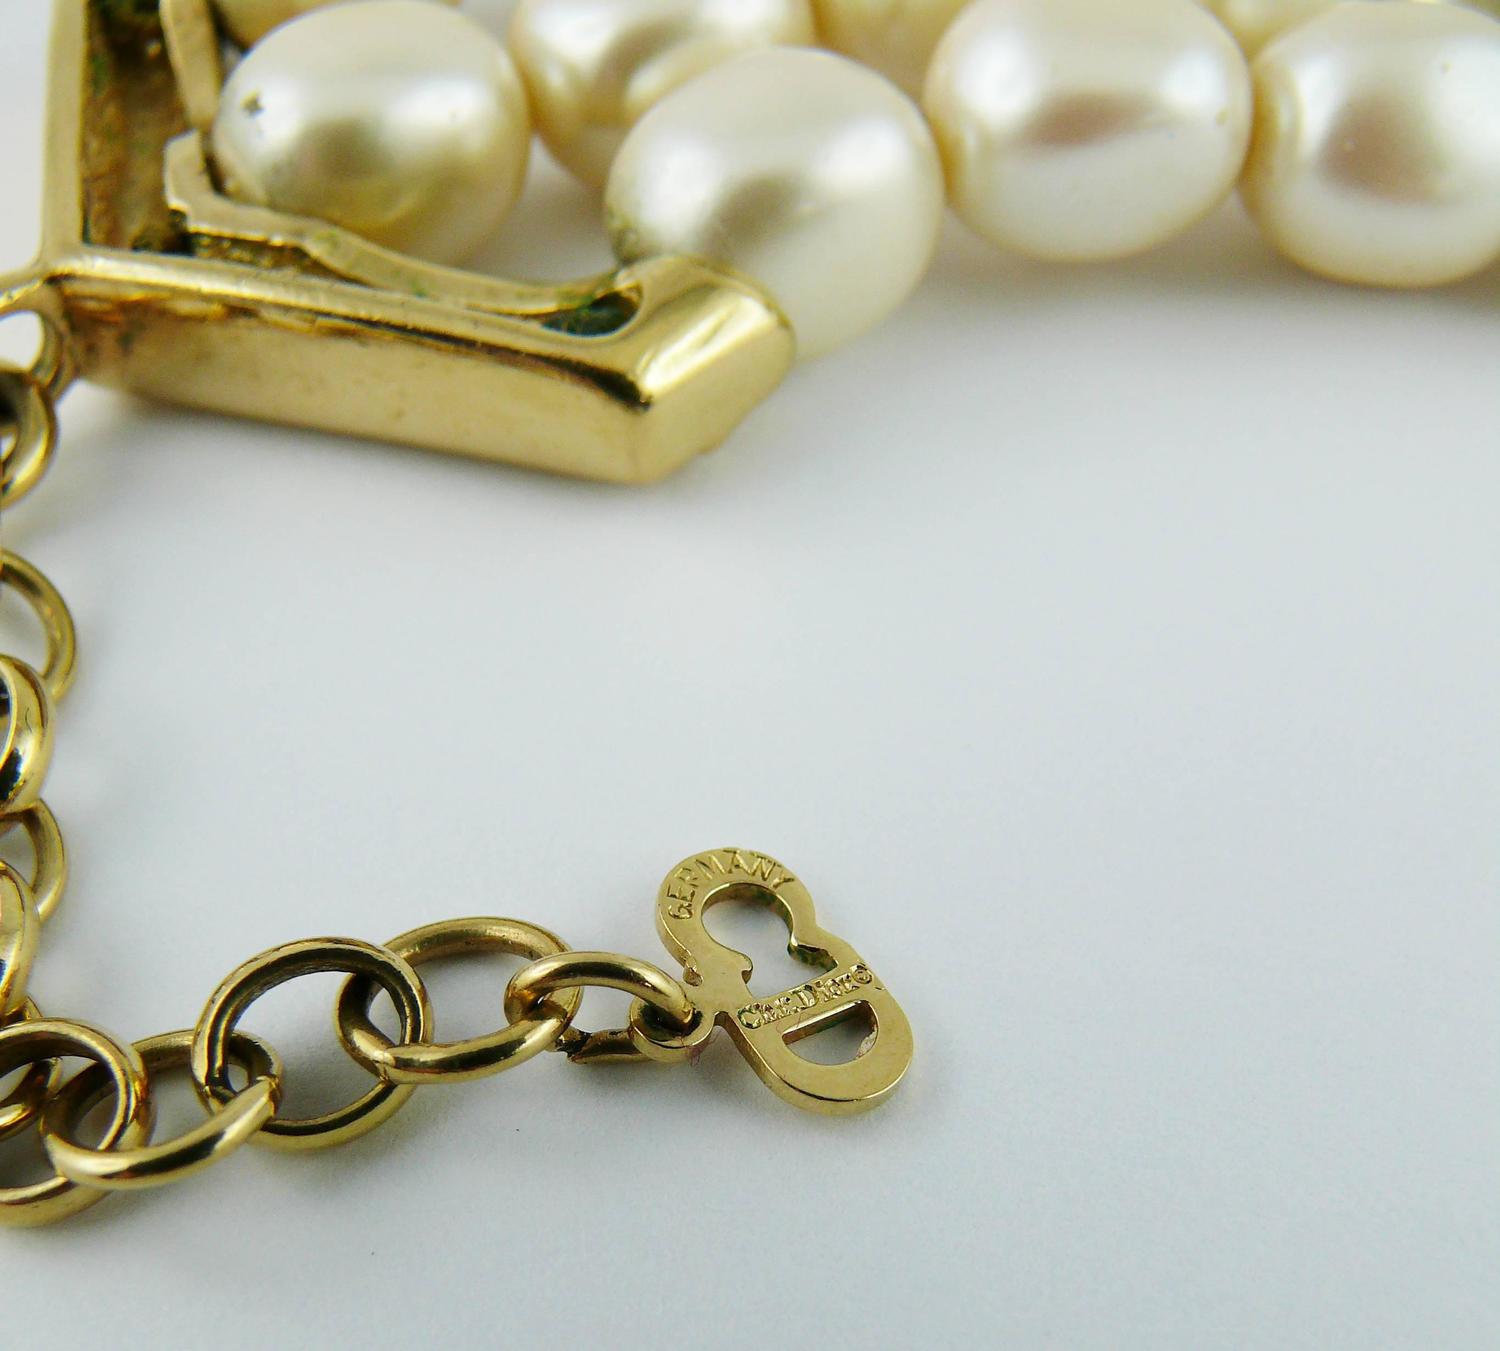 Christian Dior Vintage Pearl Logo Choker Necklace For Sale at 1stdibs